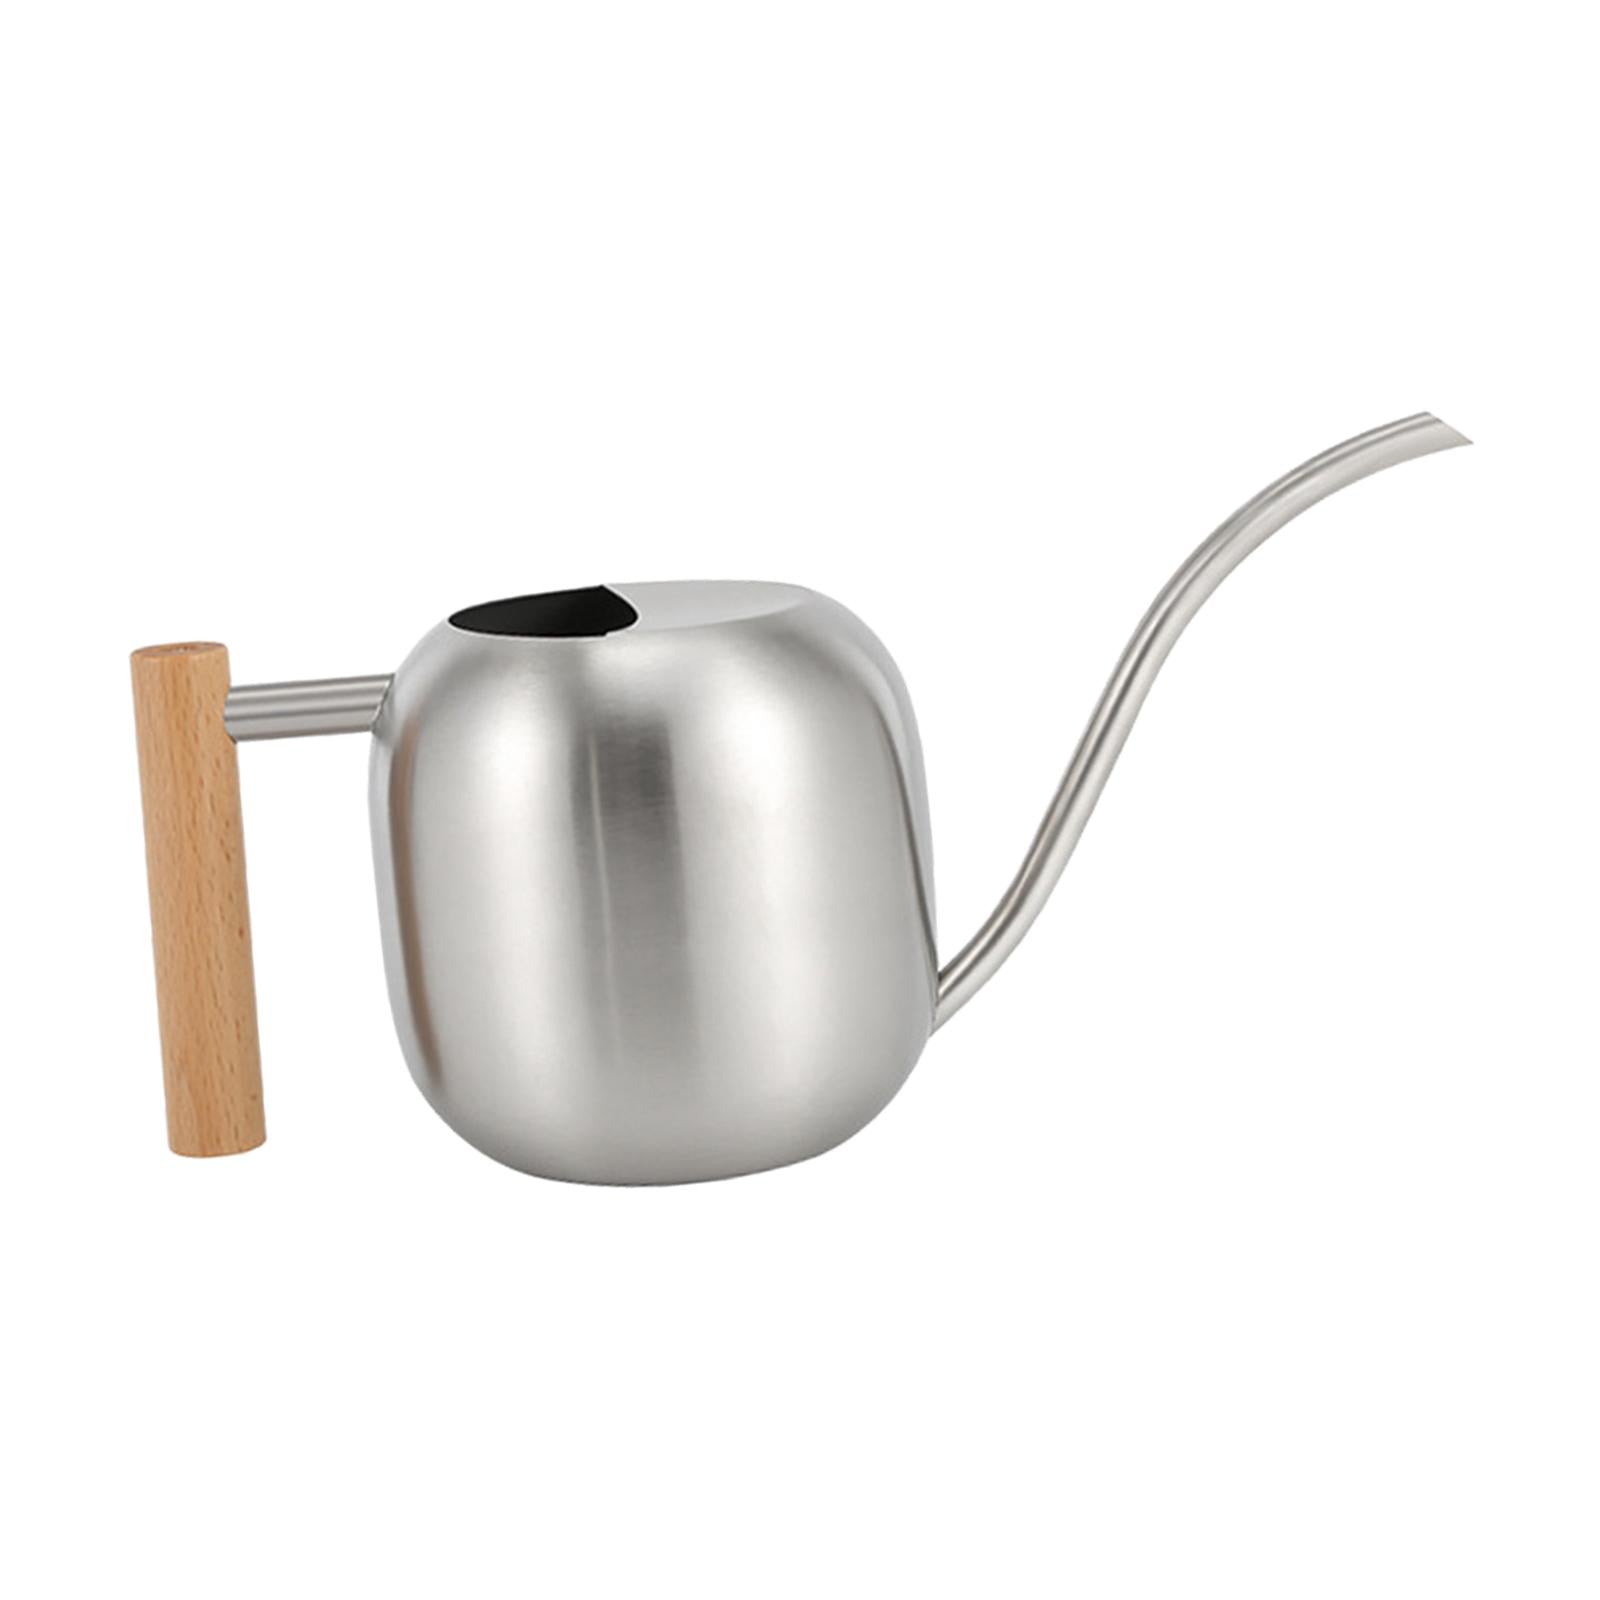 Stainless Steel Indoor Watering Can ,Modern Watering Can Pot, Wooden Handle Long Spout Watering Can for Patio, Flower ,Outdoor Decorative